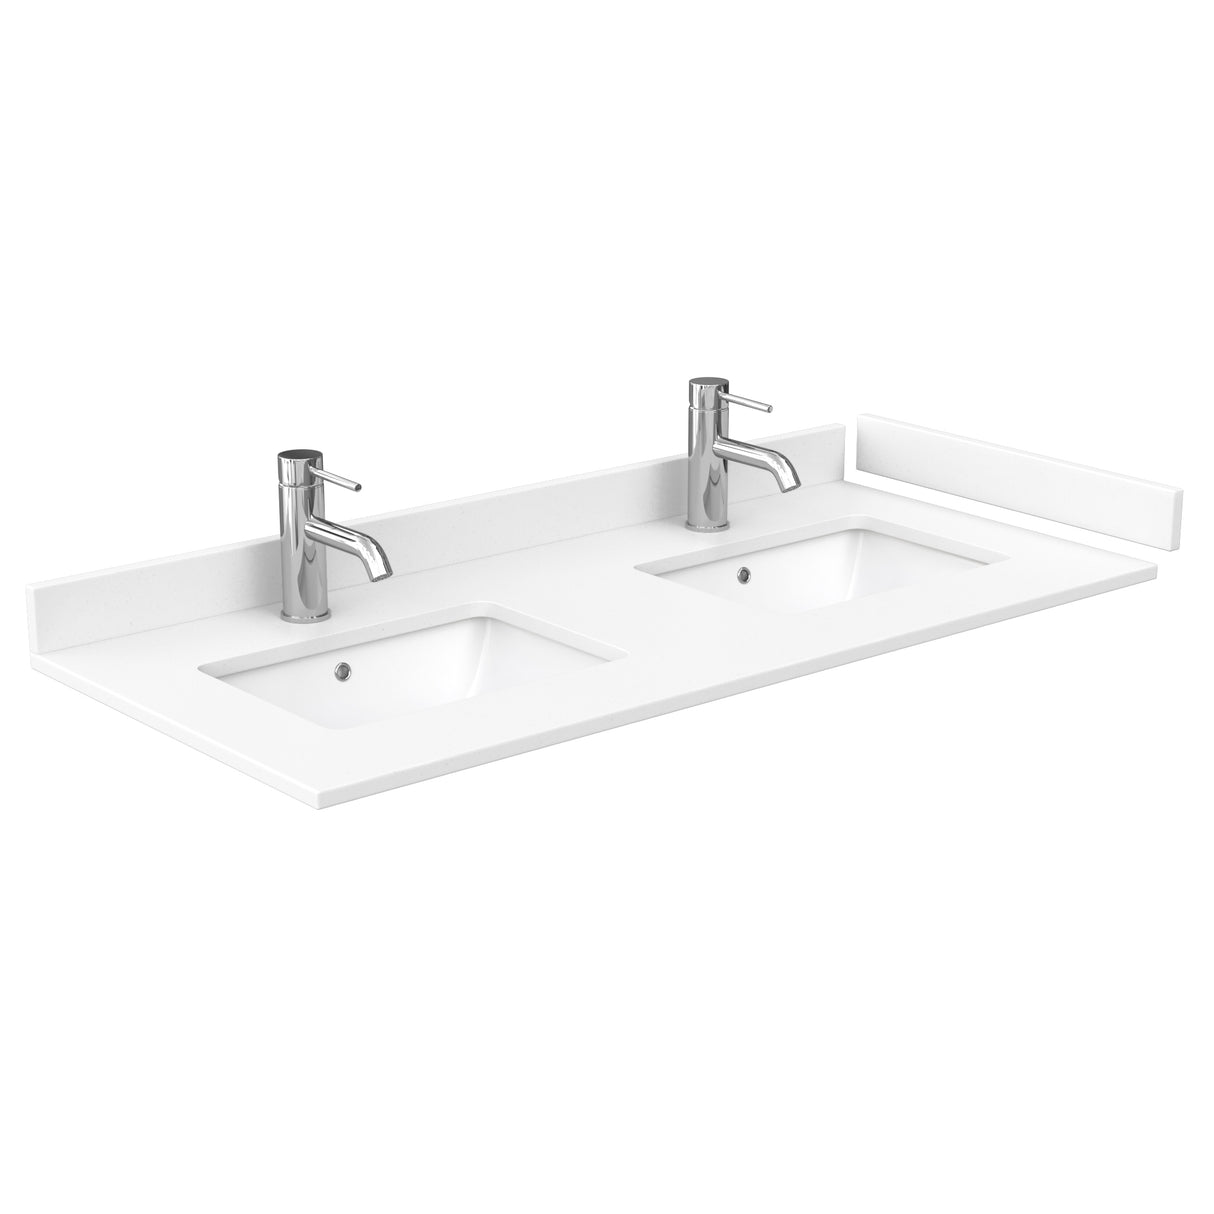 Beckett 48 Inch Double Bathroom Vanity in White White Cultured Marble Countertop Undermount Square Sinks Brushed Nickel Trim